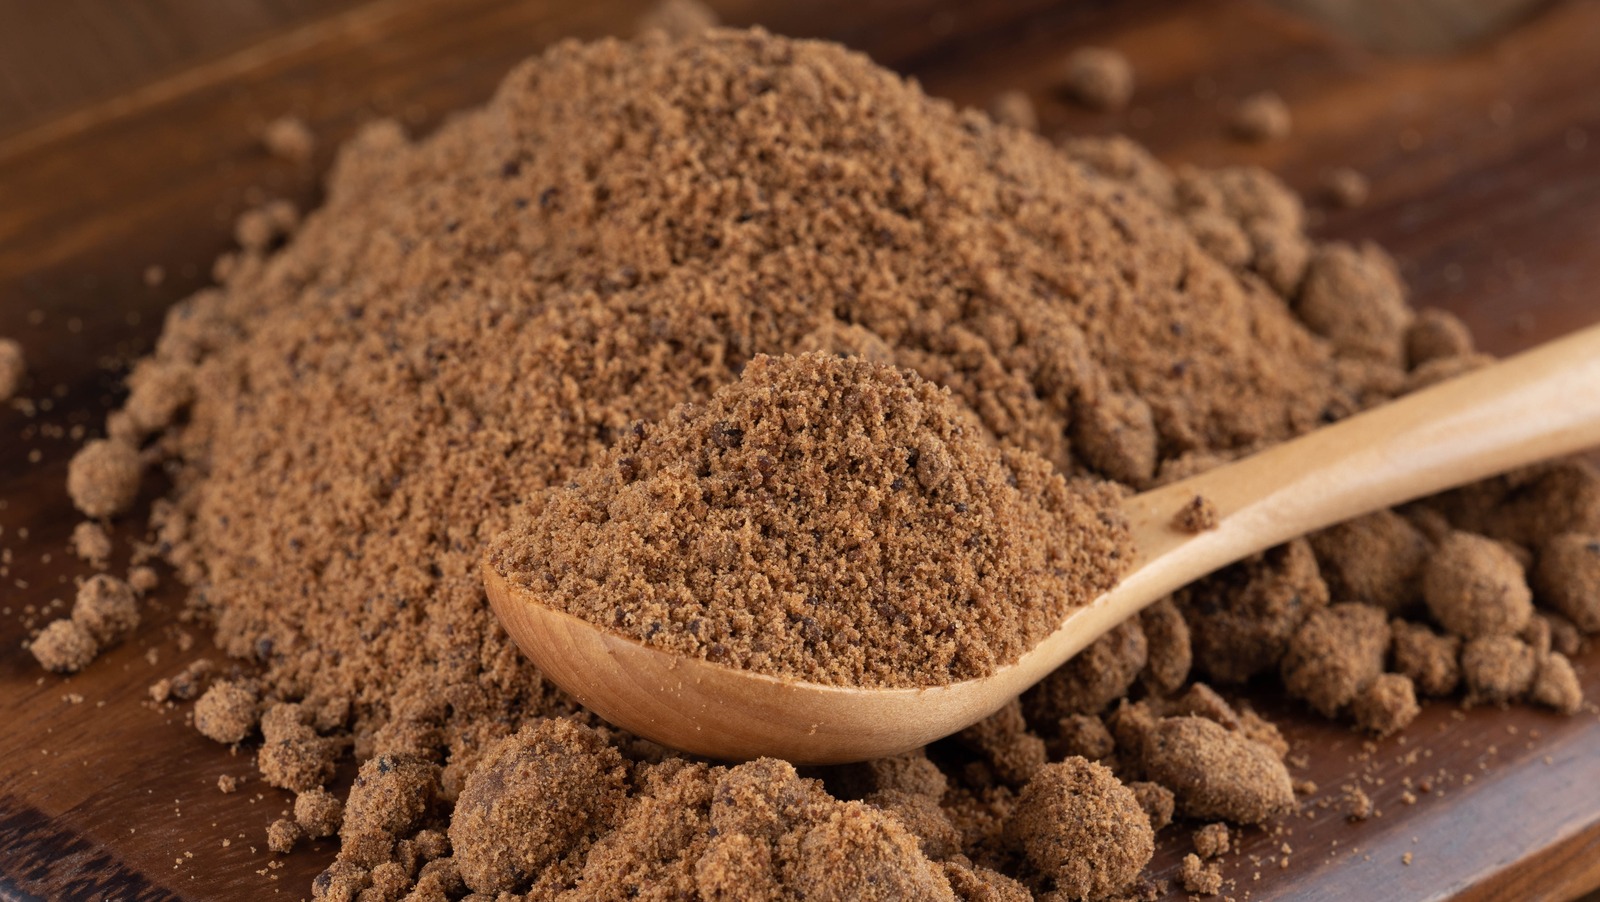 https://www.tastingtable.com/img/gallery/brown-sugar-vs-muscovado-sugar-whats-the-difference/l-intro-1666376694.jpg